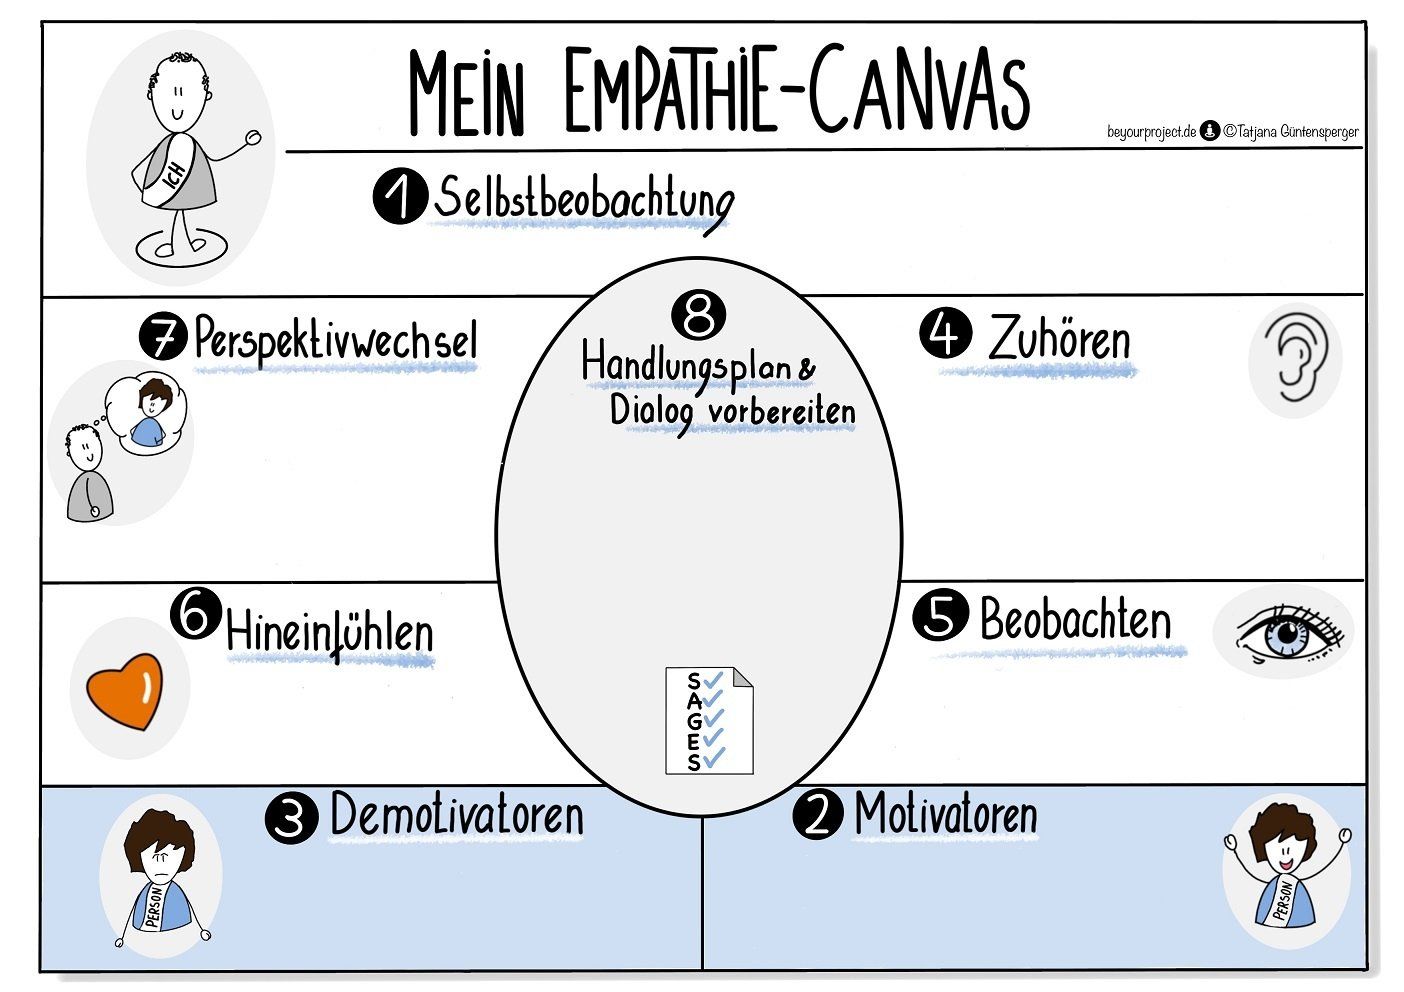 Empathie-Canvas by BEYOURPROJECT